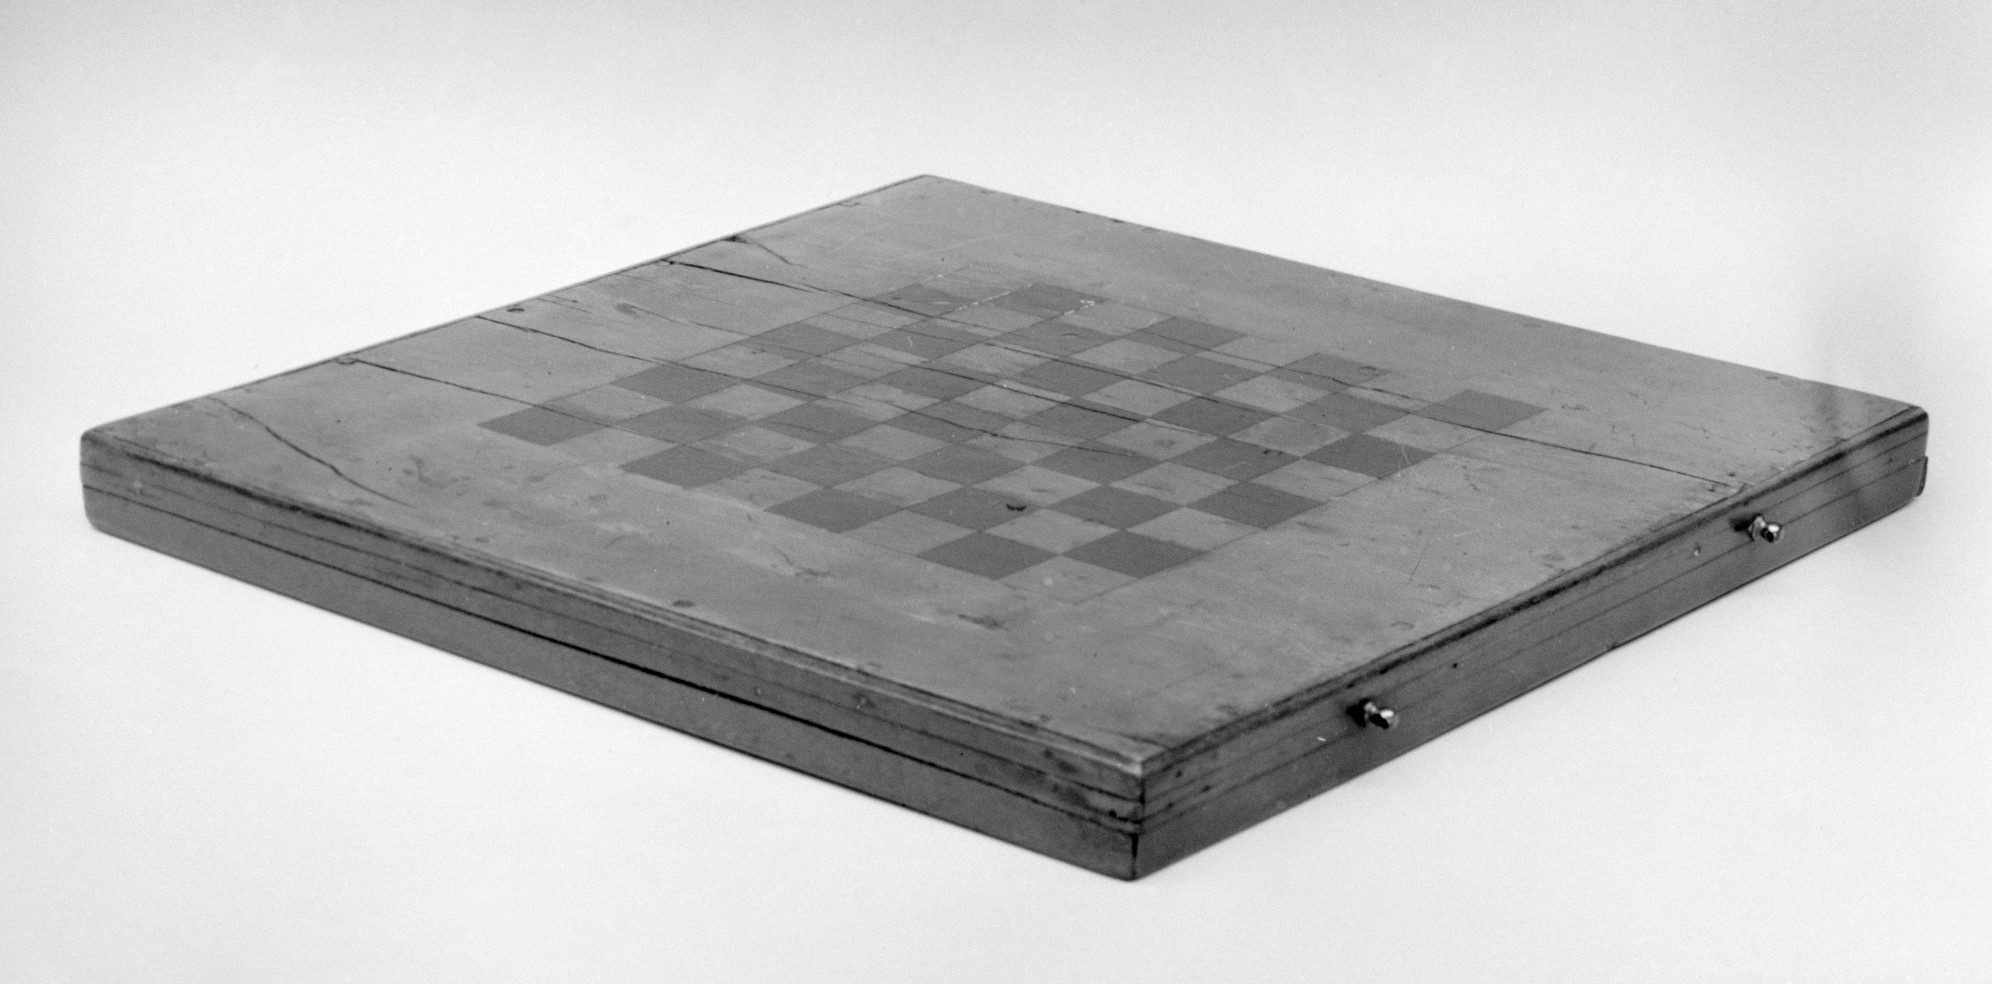 Classic black and white board game - chess, or checkers (draughts)